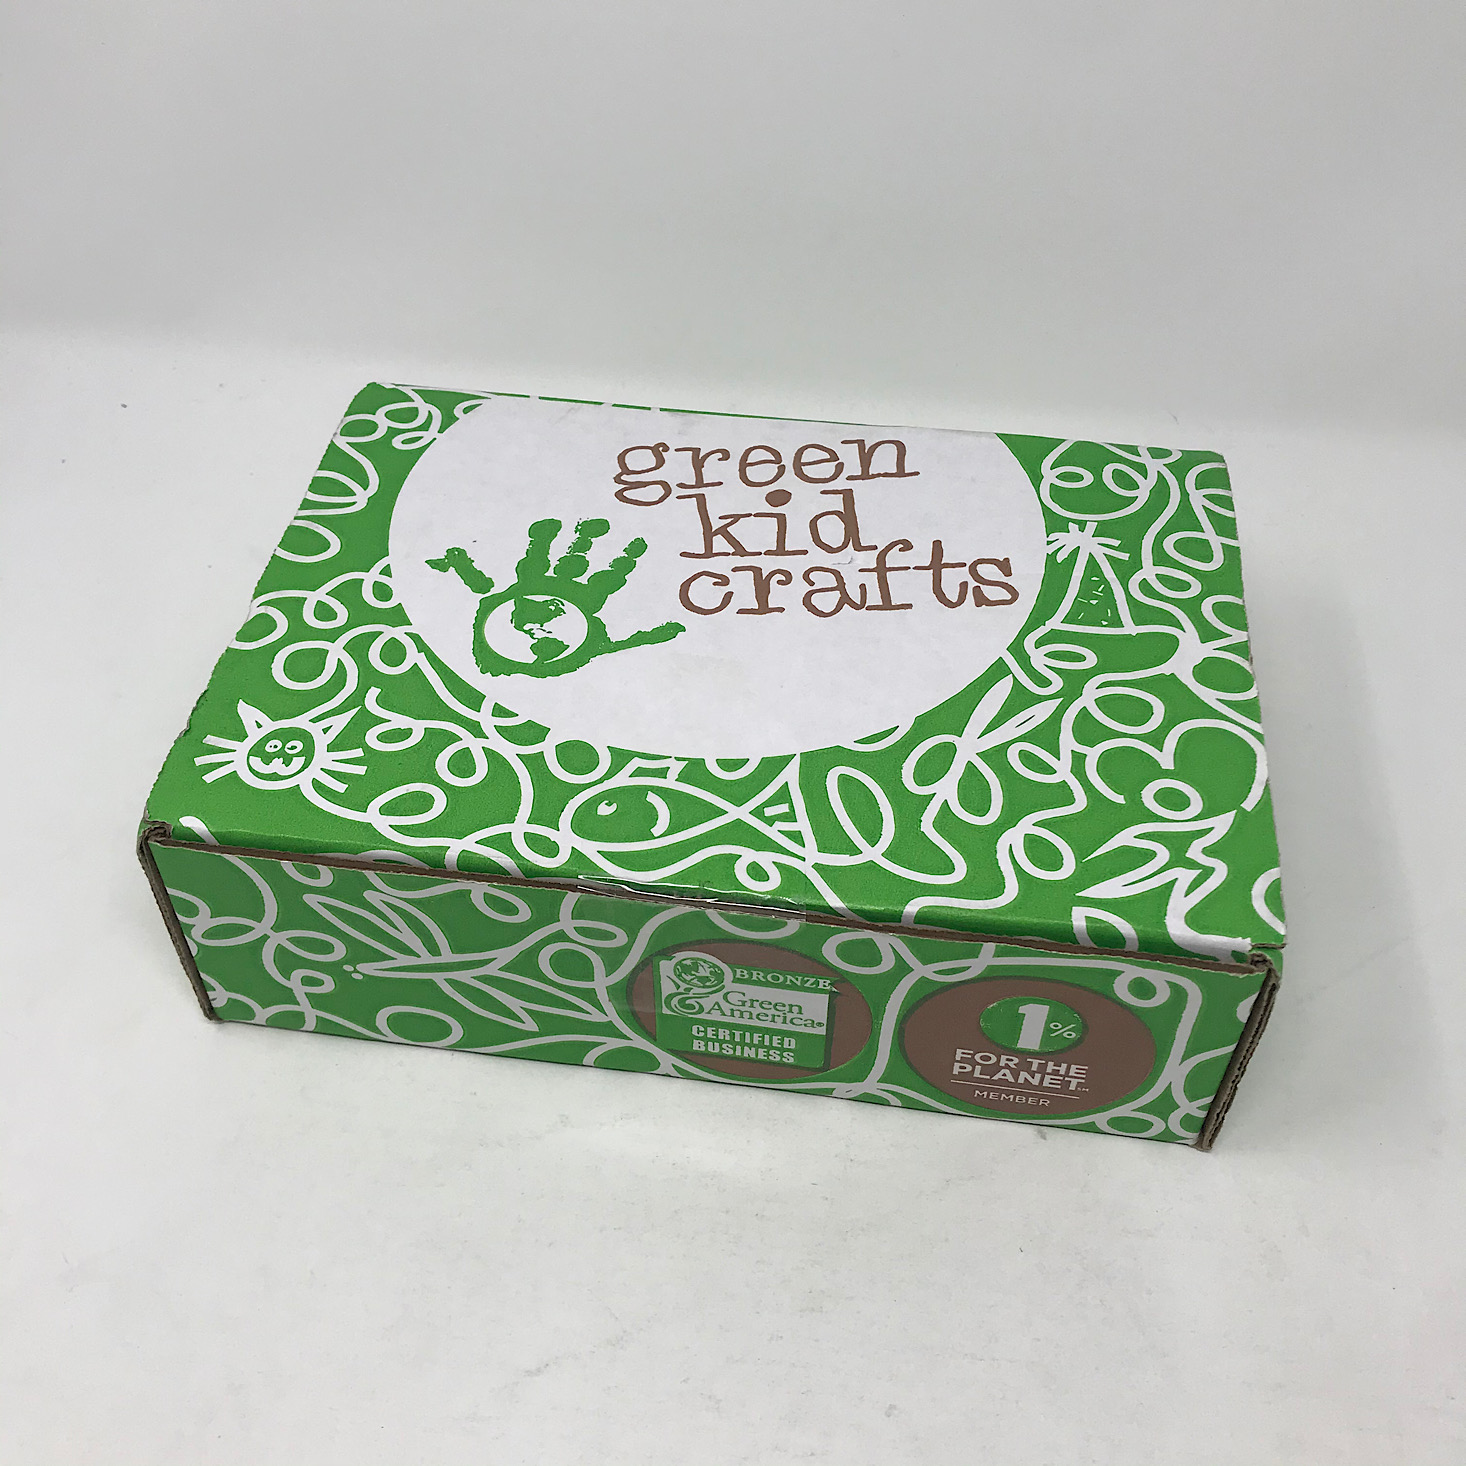 Green Kid Crafts Review + Coupon – February 2020